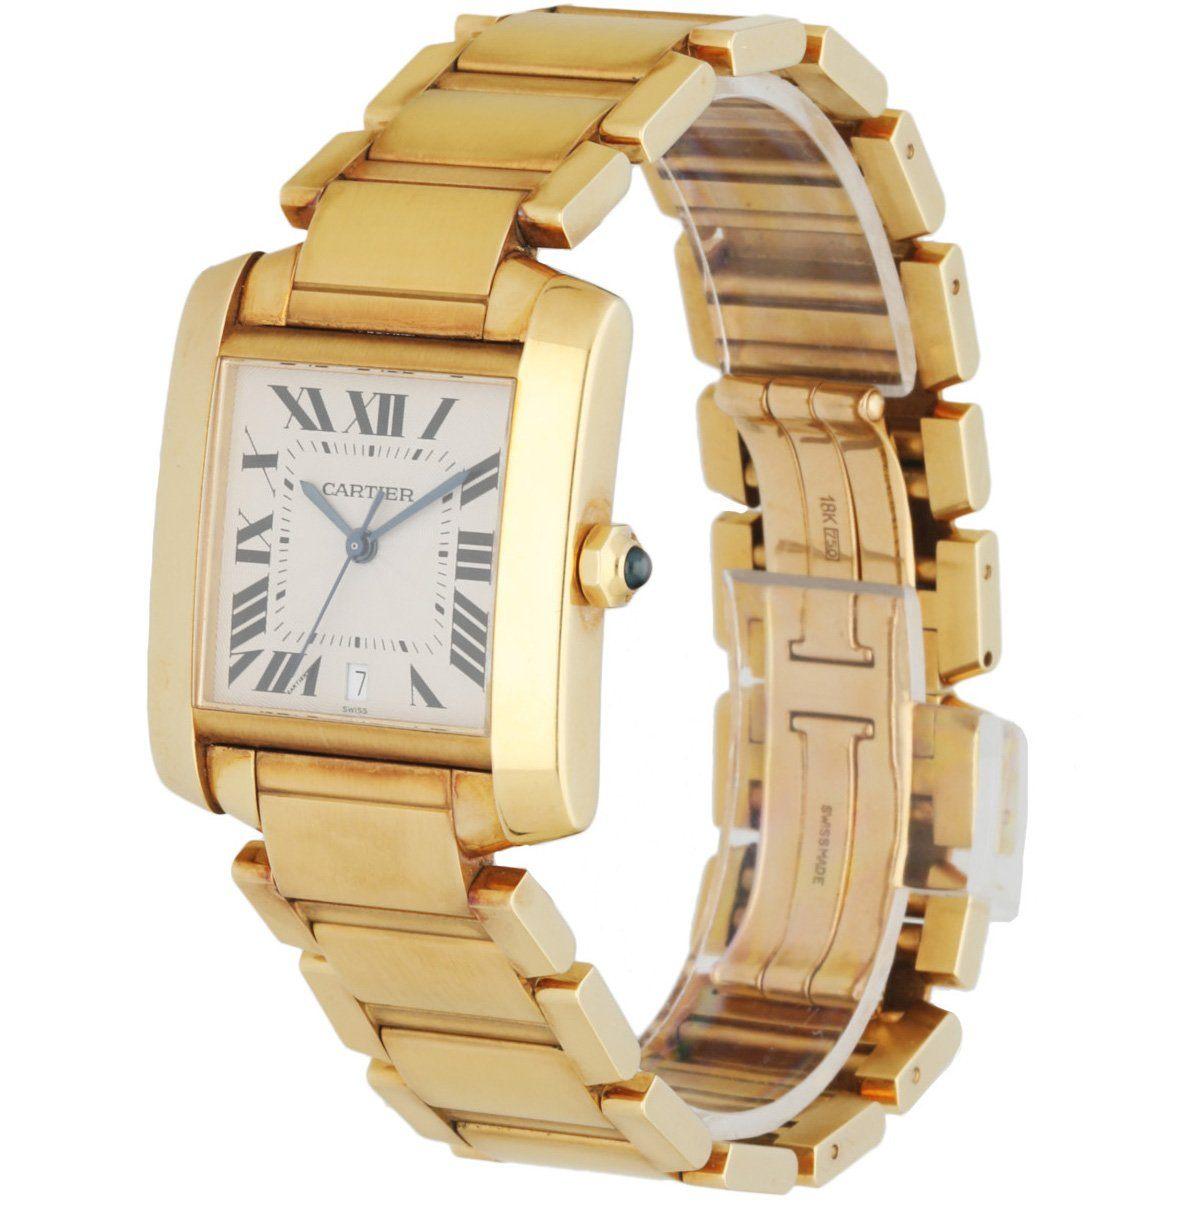 Cartier Tank Francaise 1840 Watch. 28mm 18K yellow gold case with smooth bezel. Off-White dial with blue steel hands and black roman numeral hour markers. Date display at the 6 o'clock position. Minute markers around the inner dial. 18K Yellow gold